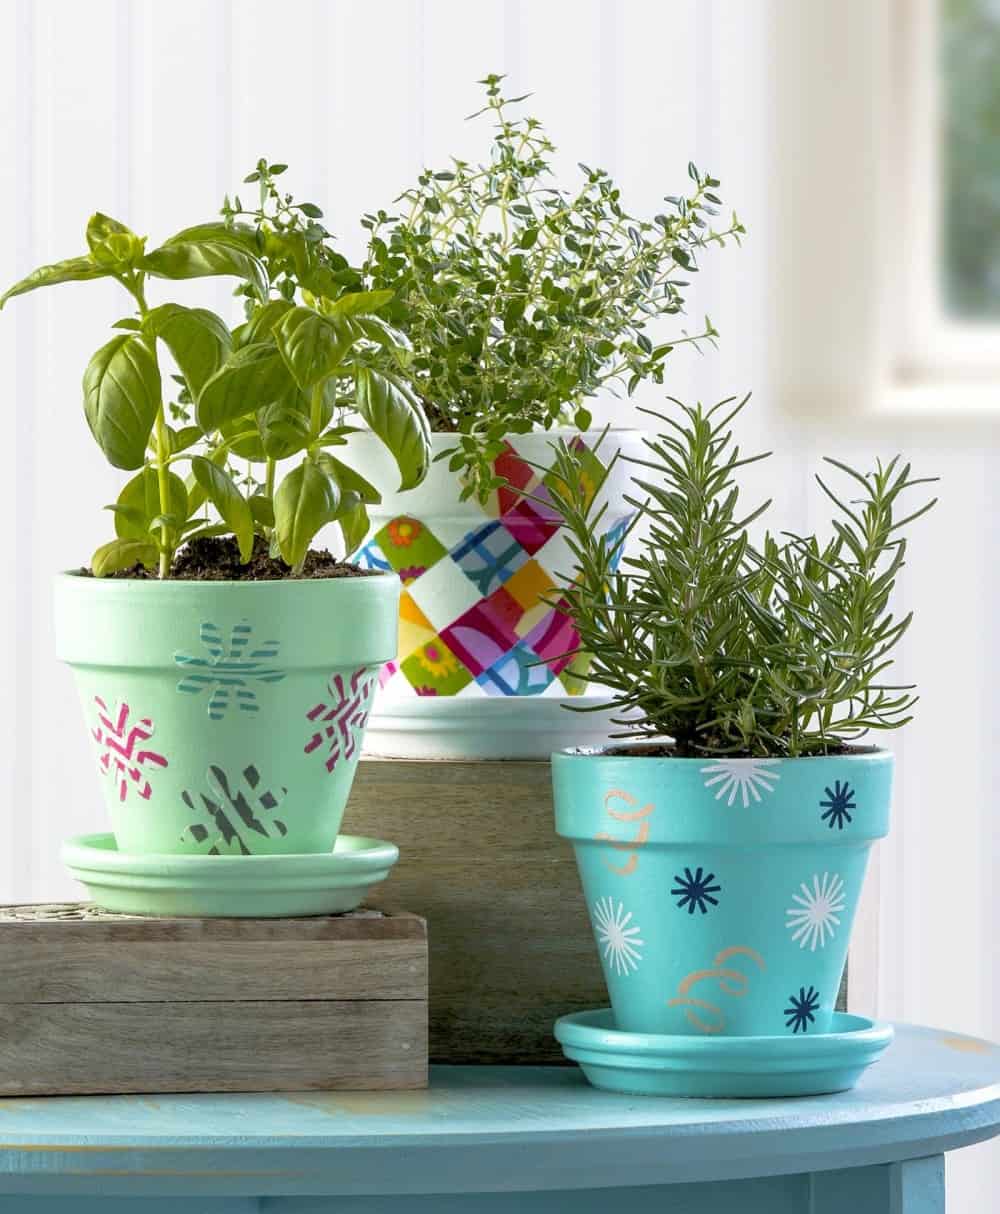 Flower pot decoration using fabric, stencils, and washi tape